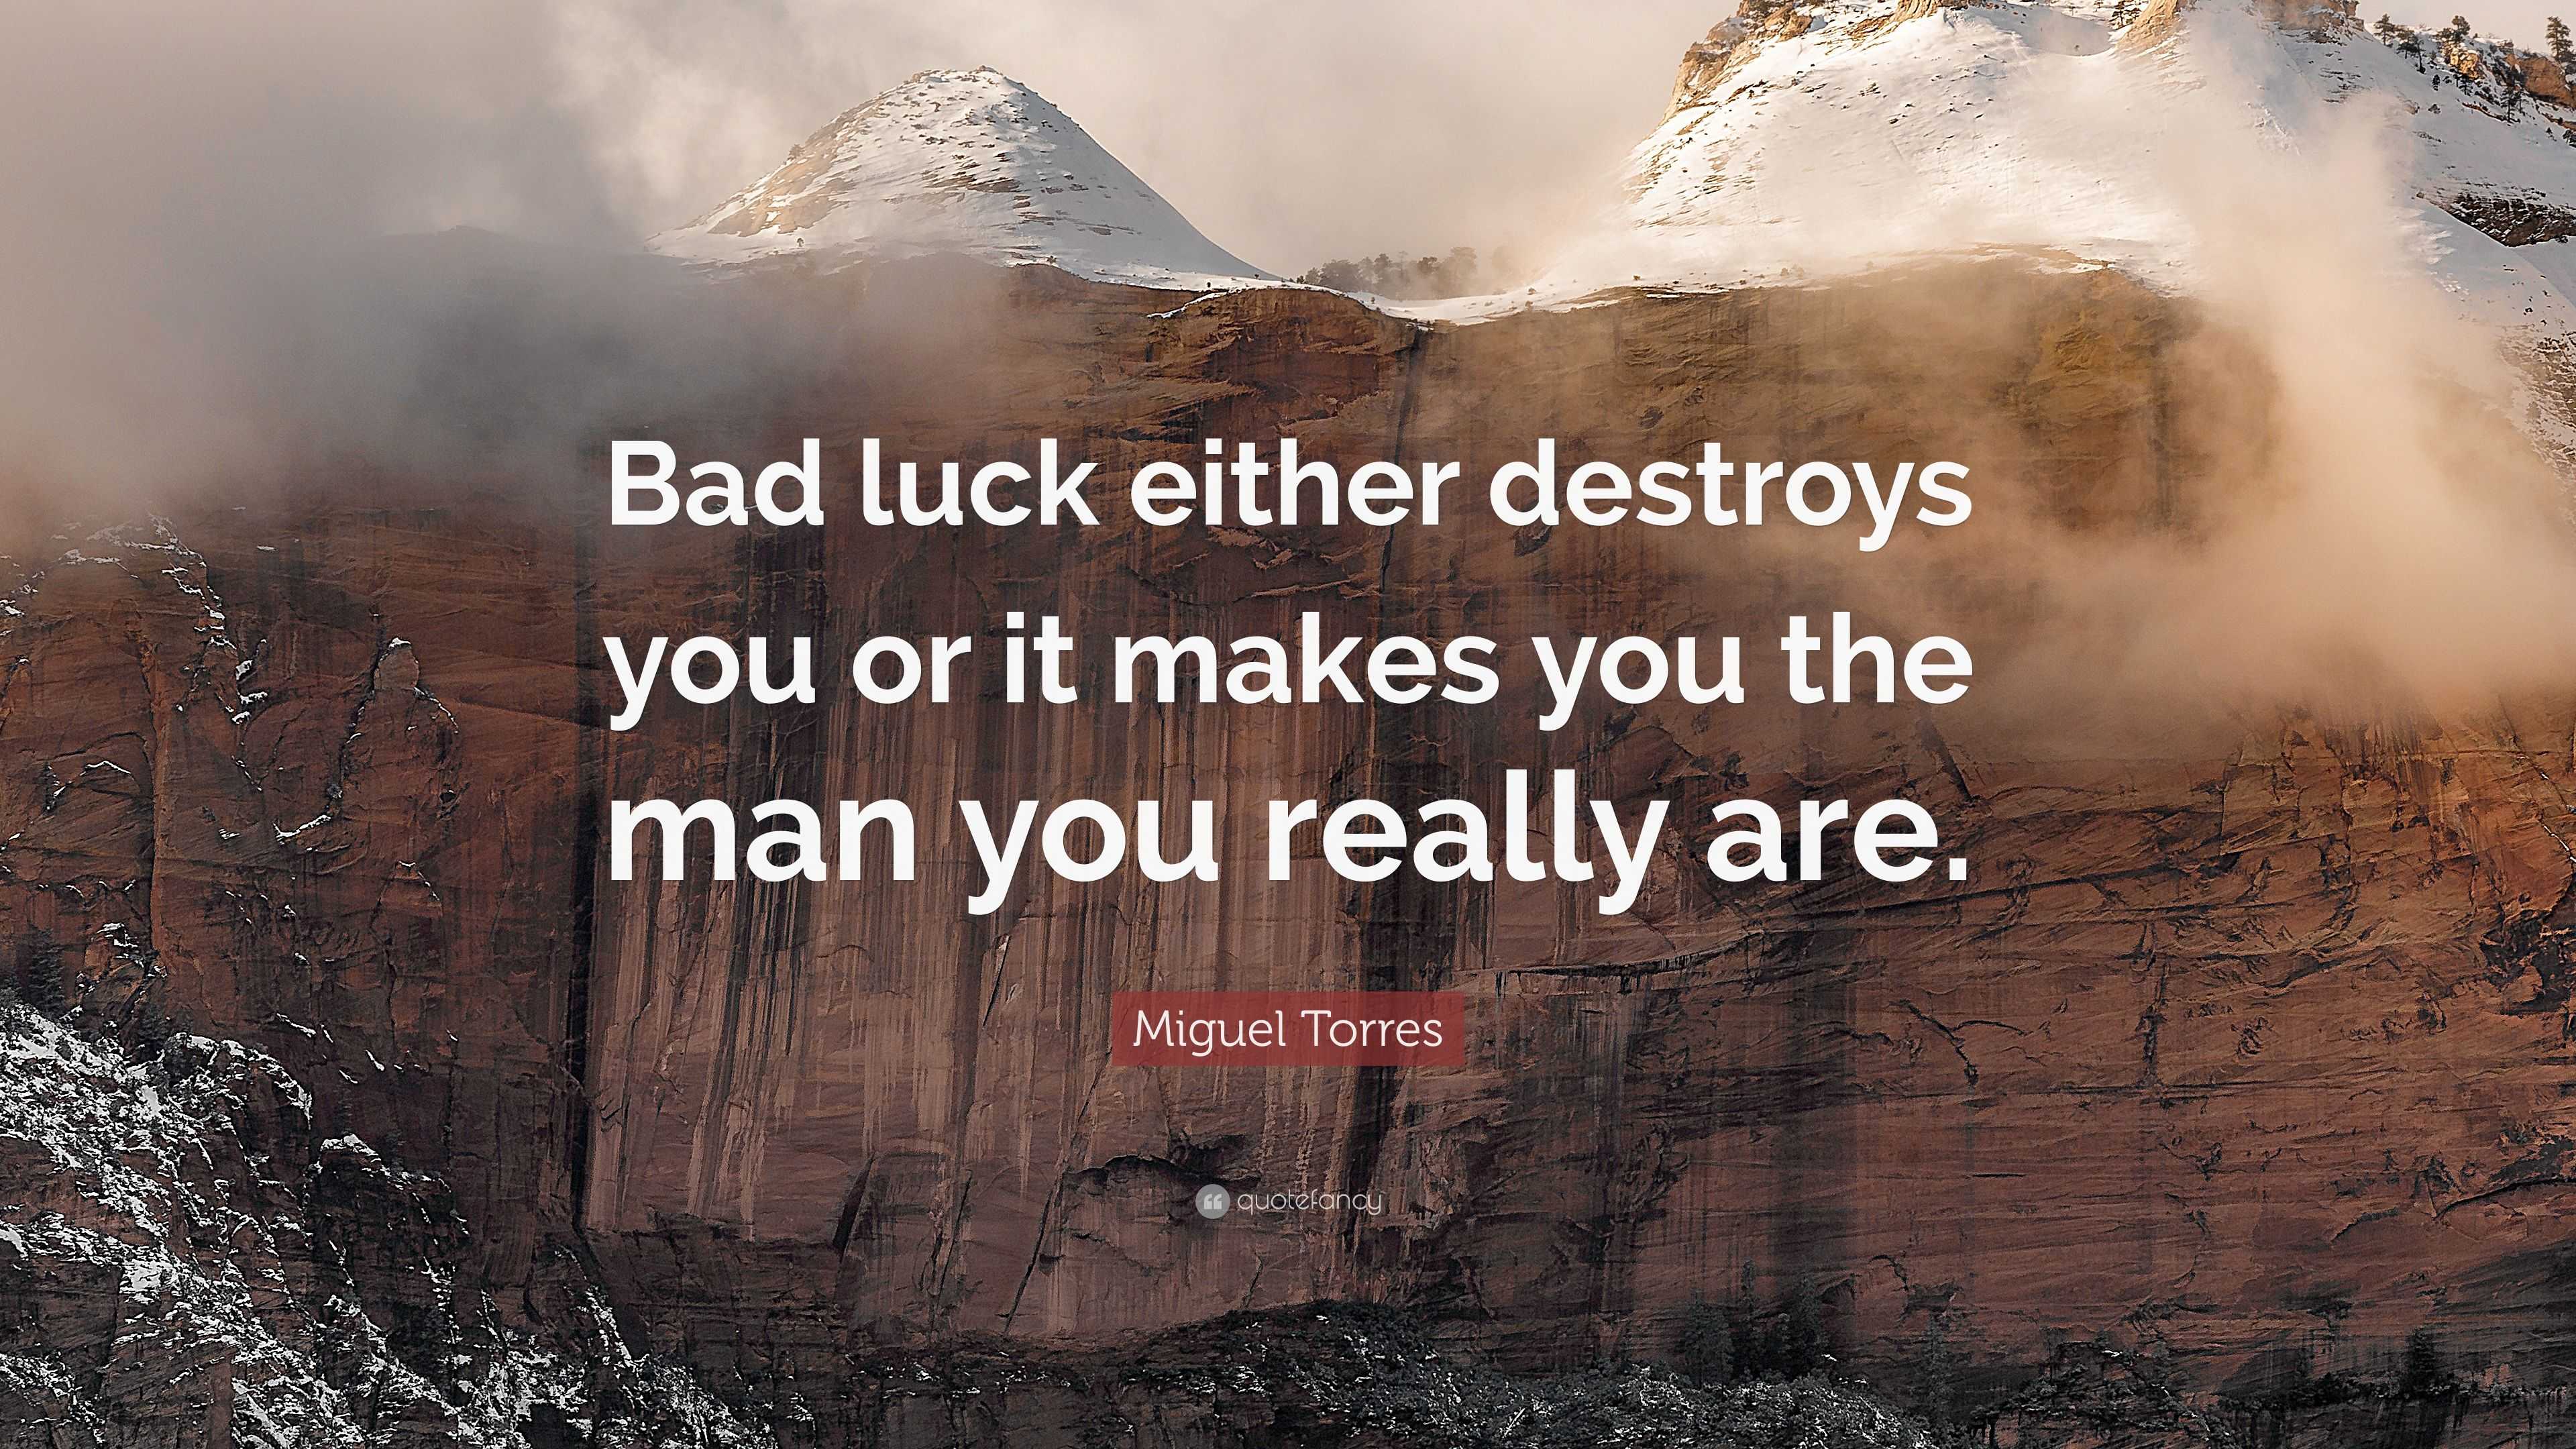 Miguel Torres Quote “Bad luck either destroys you or it makes you the man